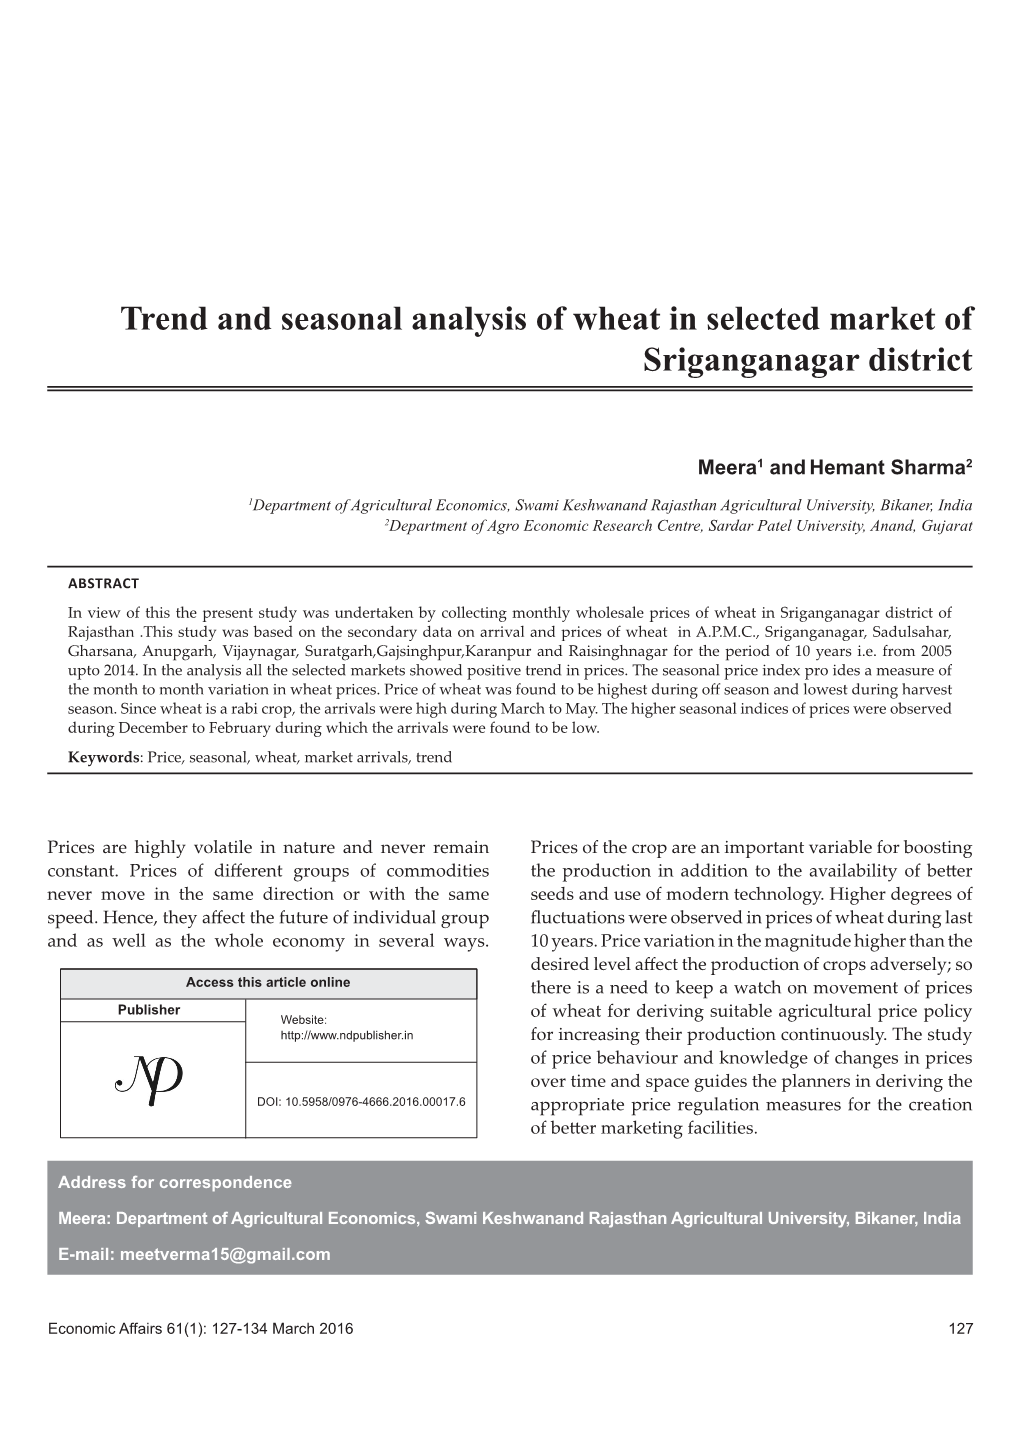 Trend and Seasonal Analysis of Wheat in Selected Market of Sriganganagar District